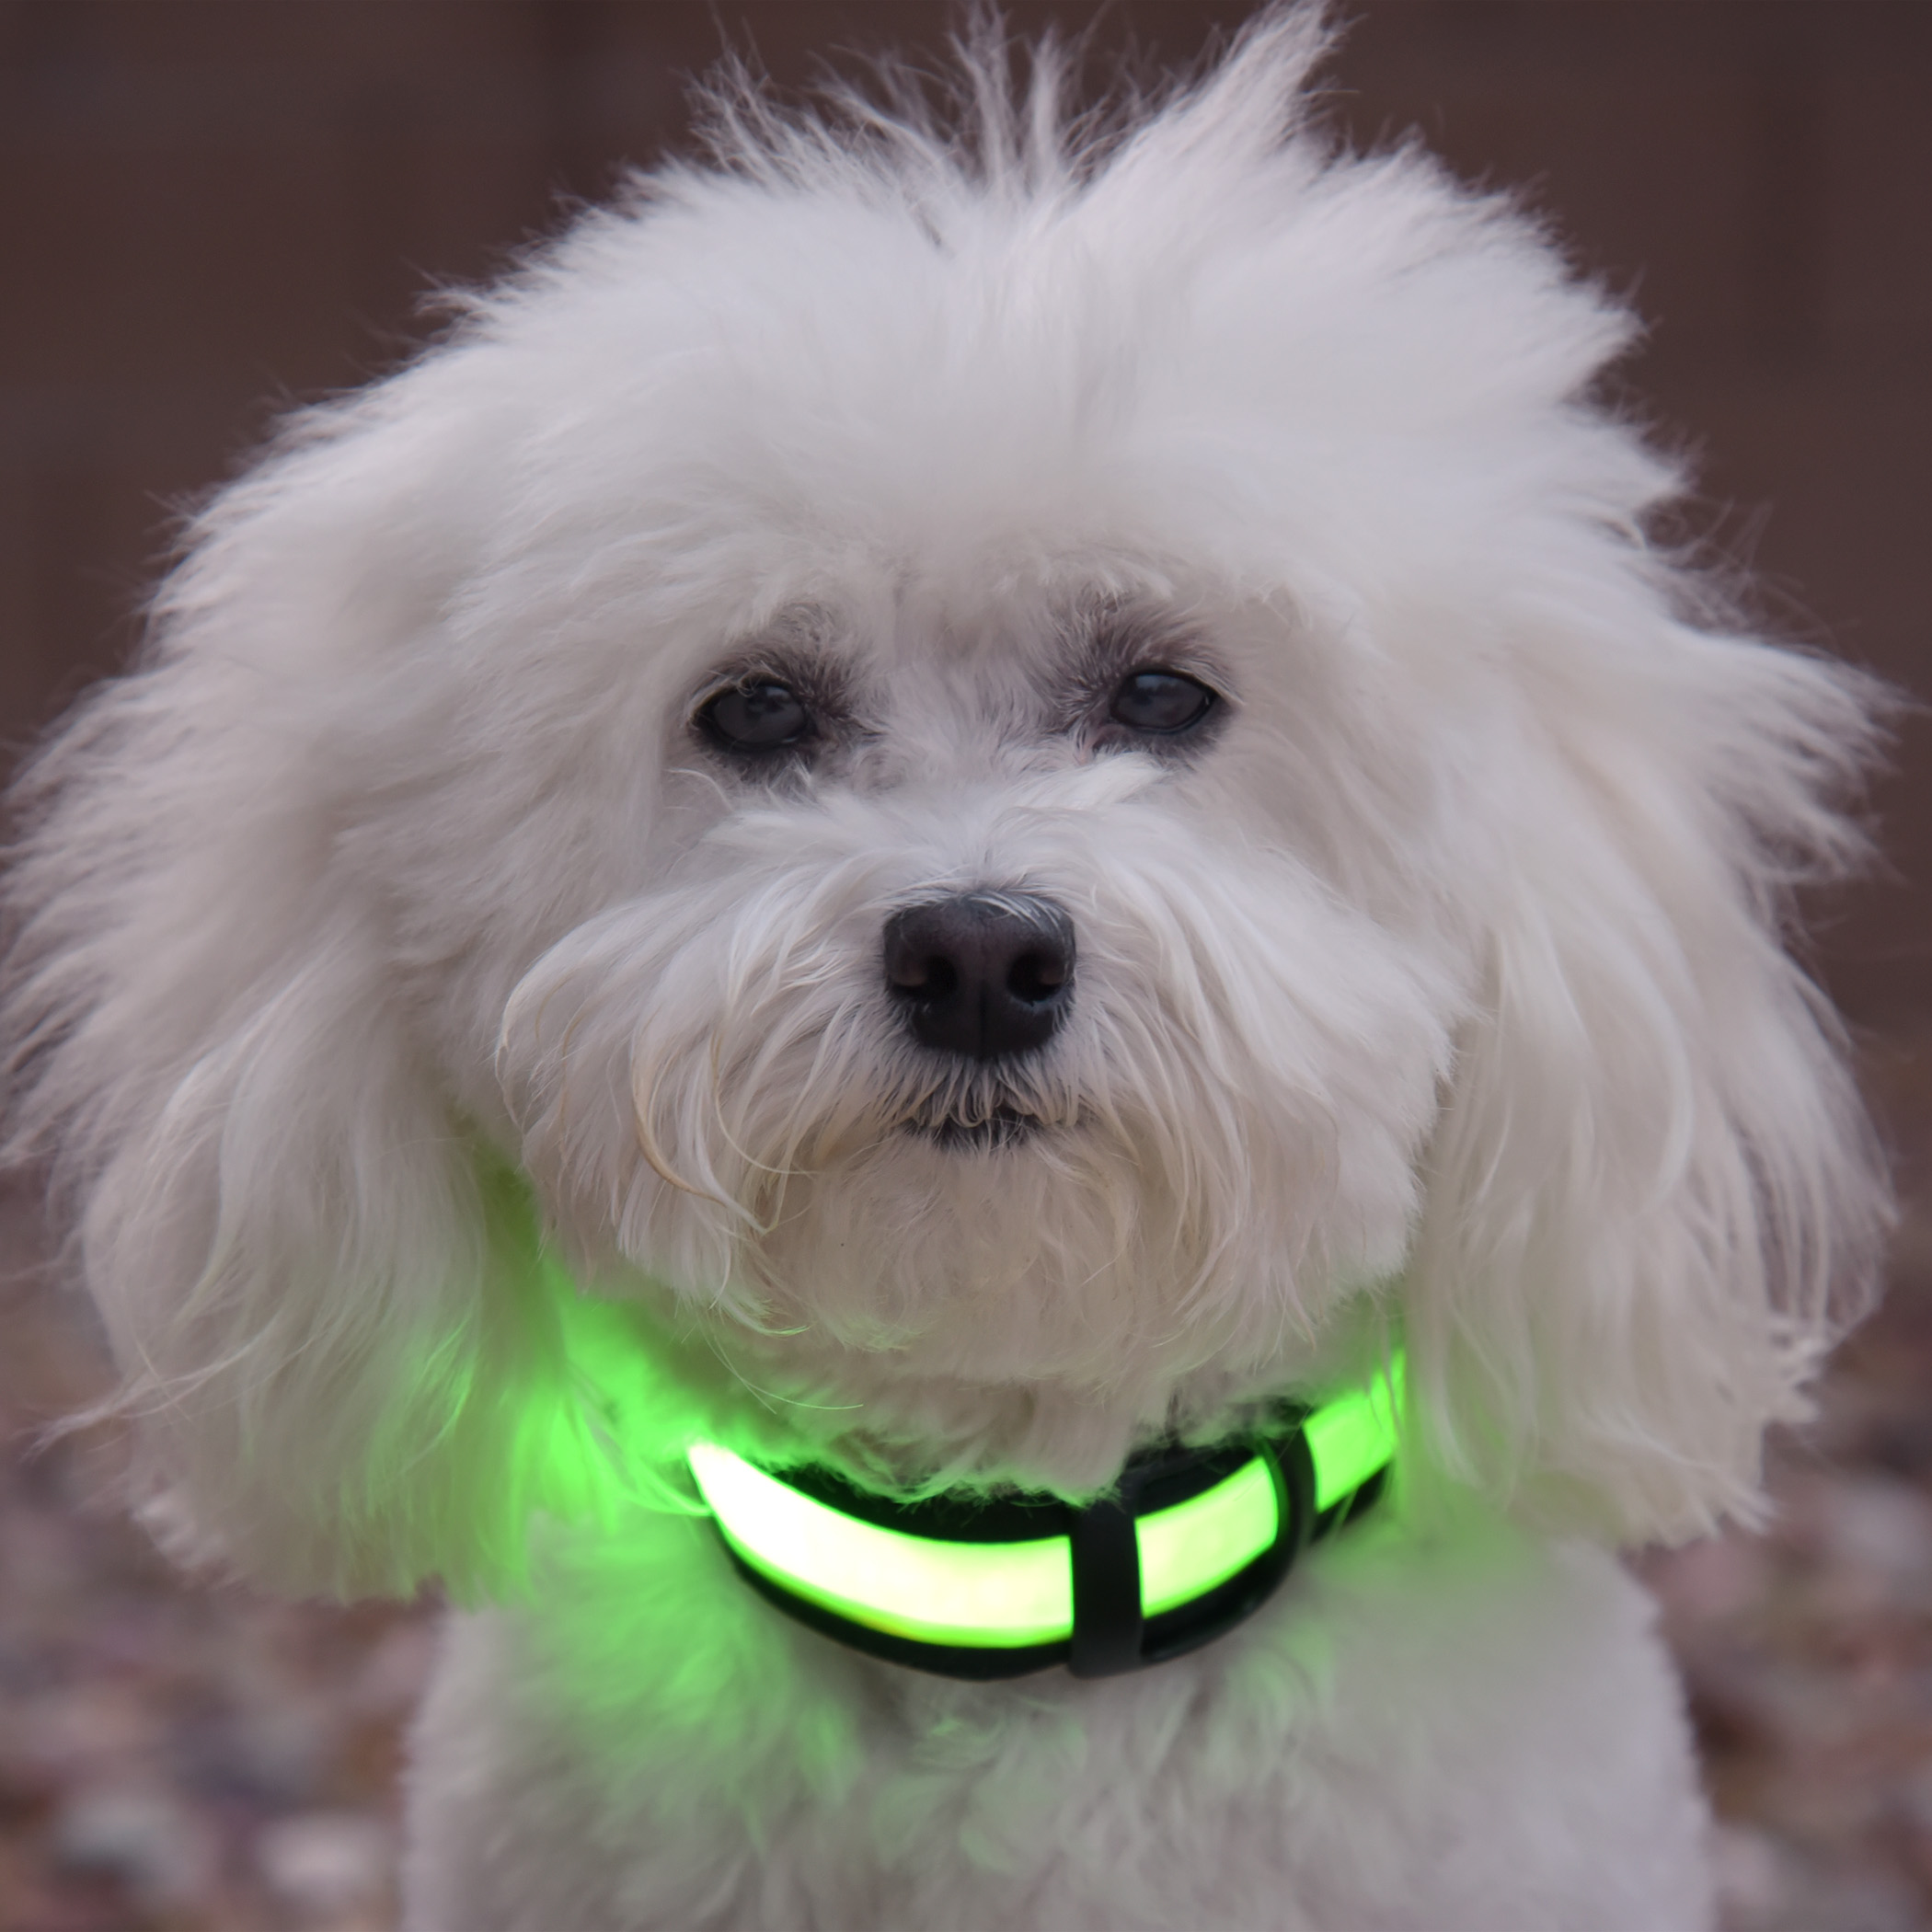  On October 16th, Bruiser will be jumping to raise money for some of our dock diving friends, who are currently fighting Breast Cancer! . A huge thank you to Halo Belt for donating their amazing LED collars to us! Now that the sun has started setting